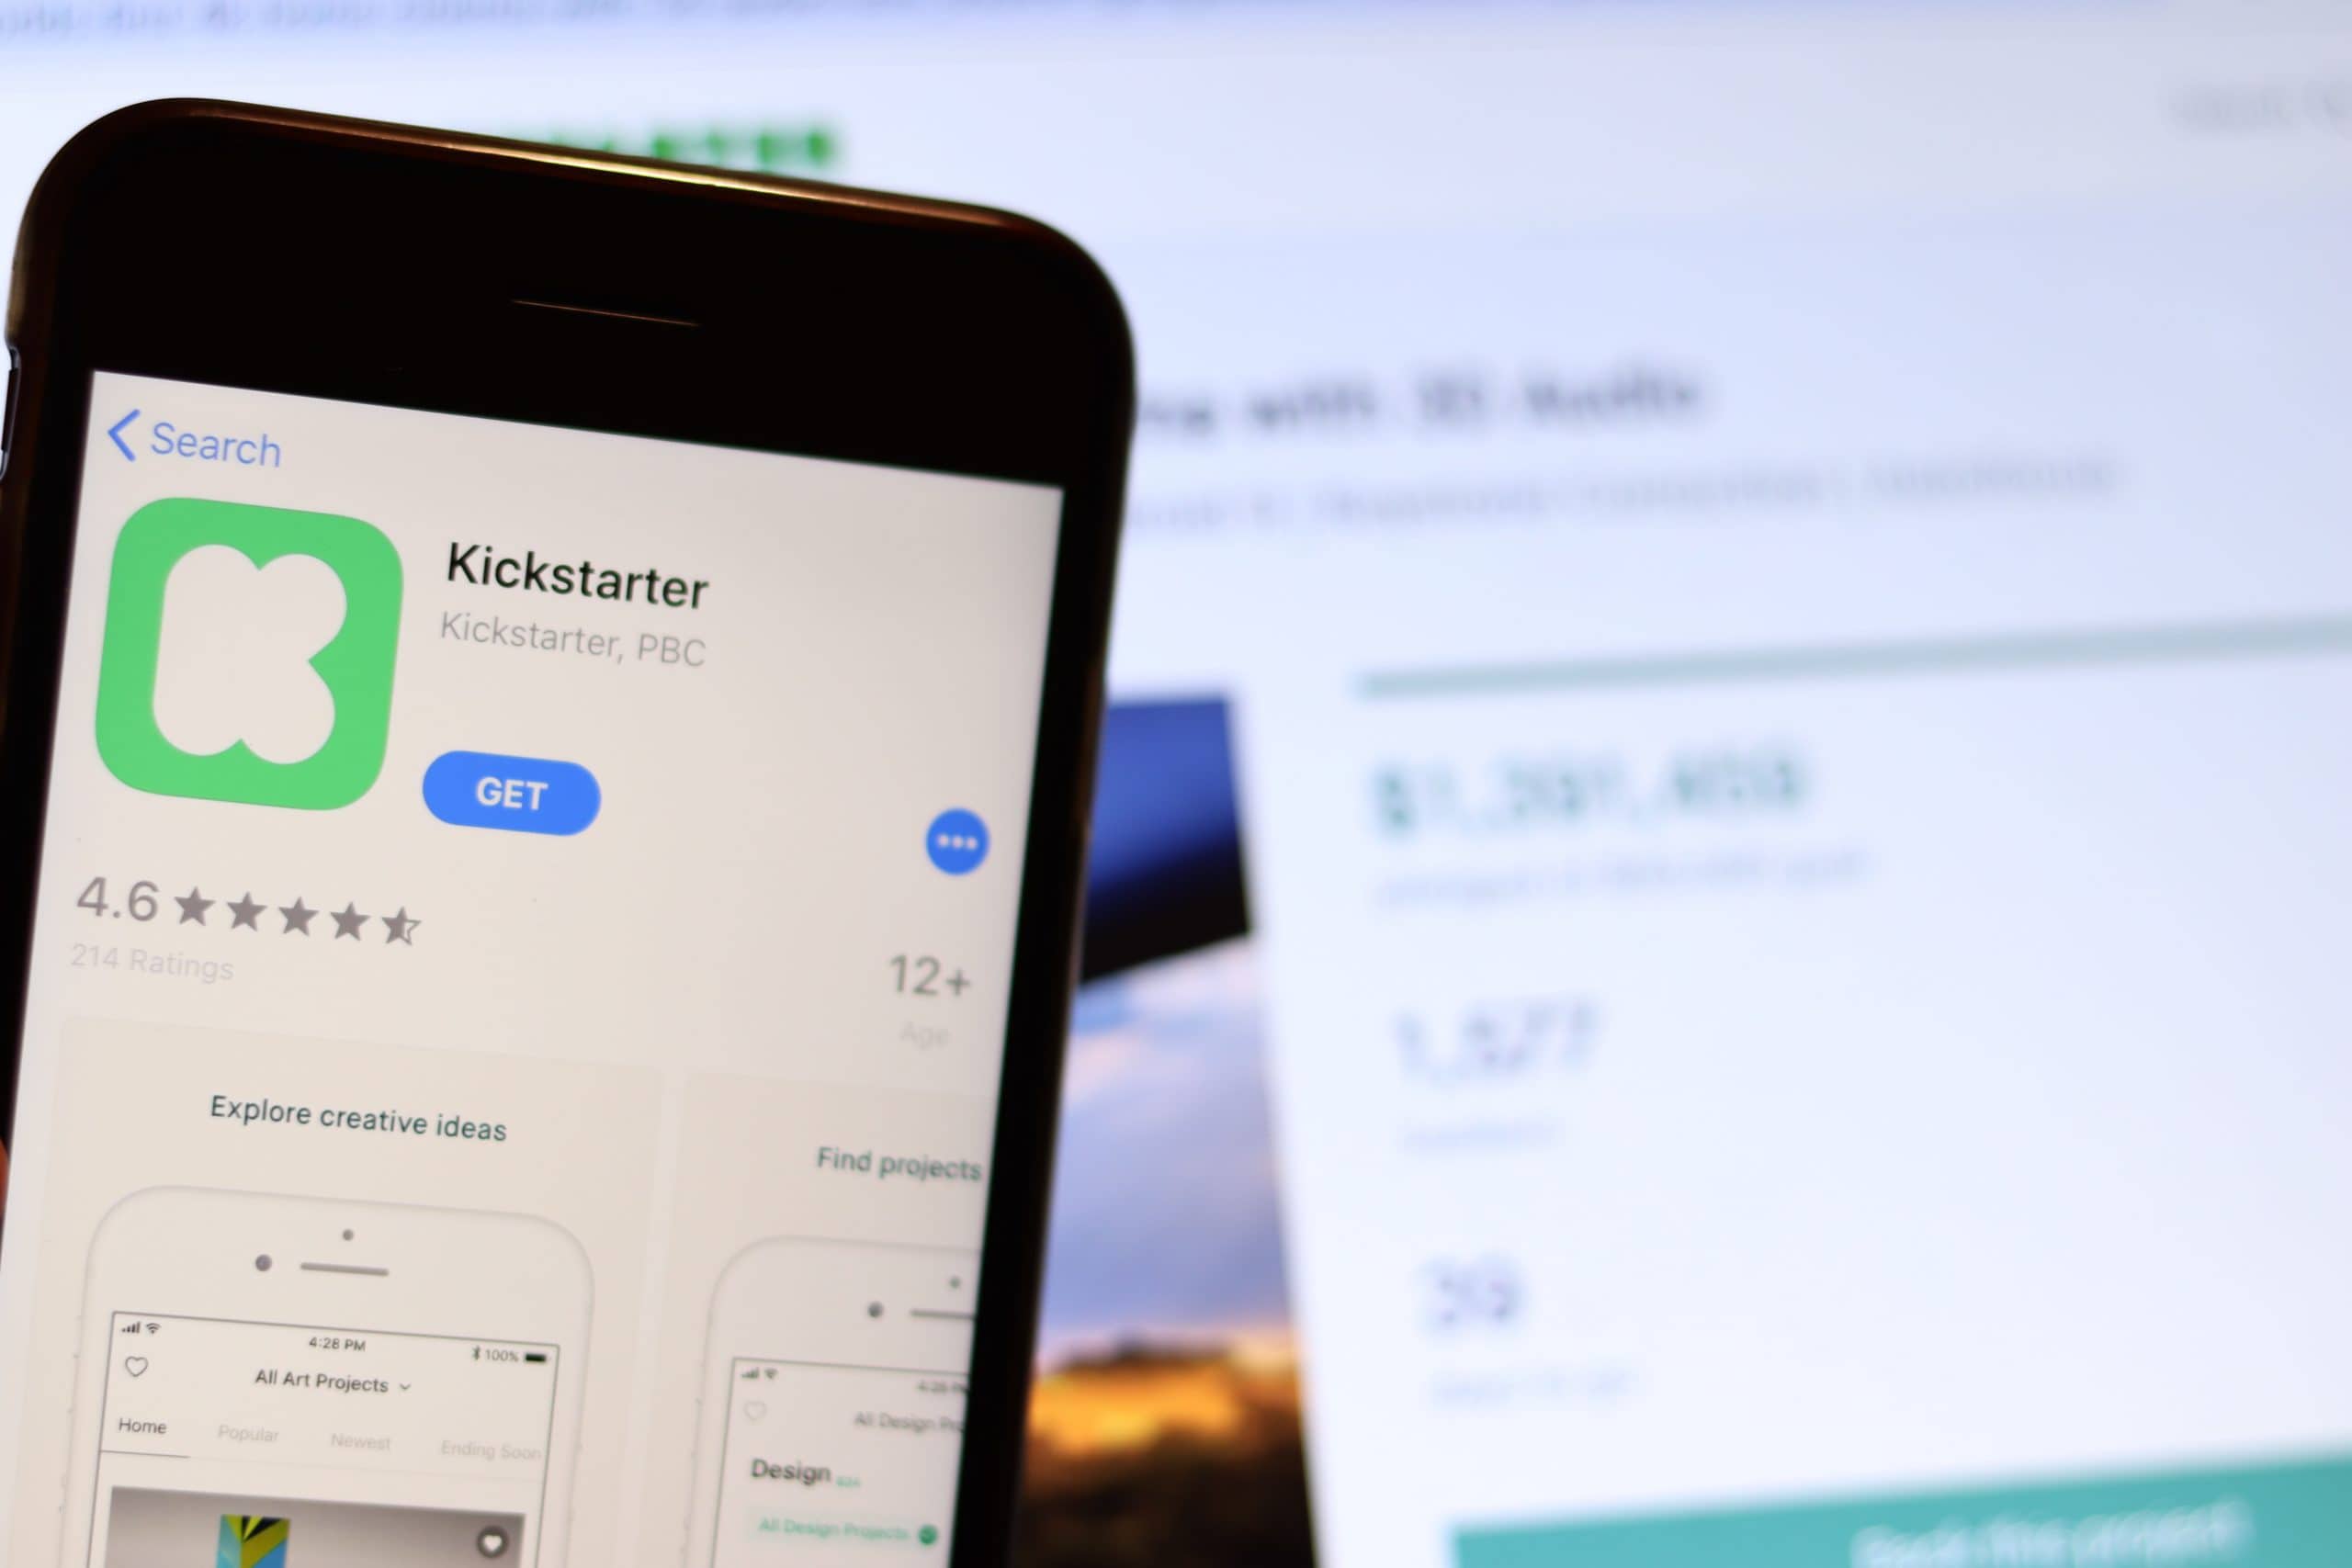 Kickstarter wants to decentralize and relies on Celo